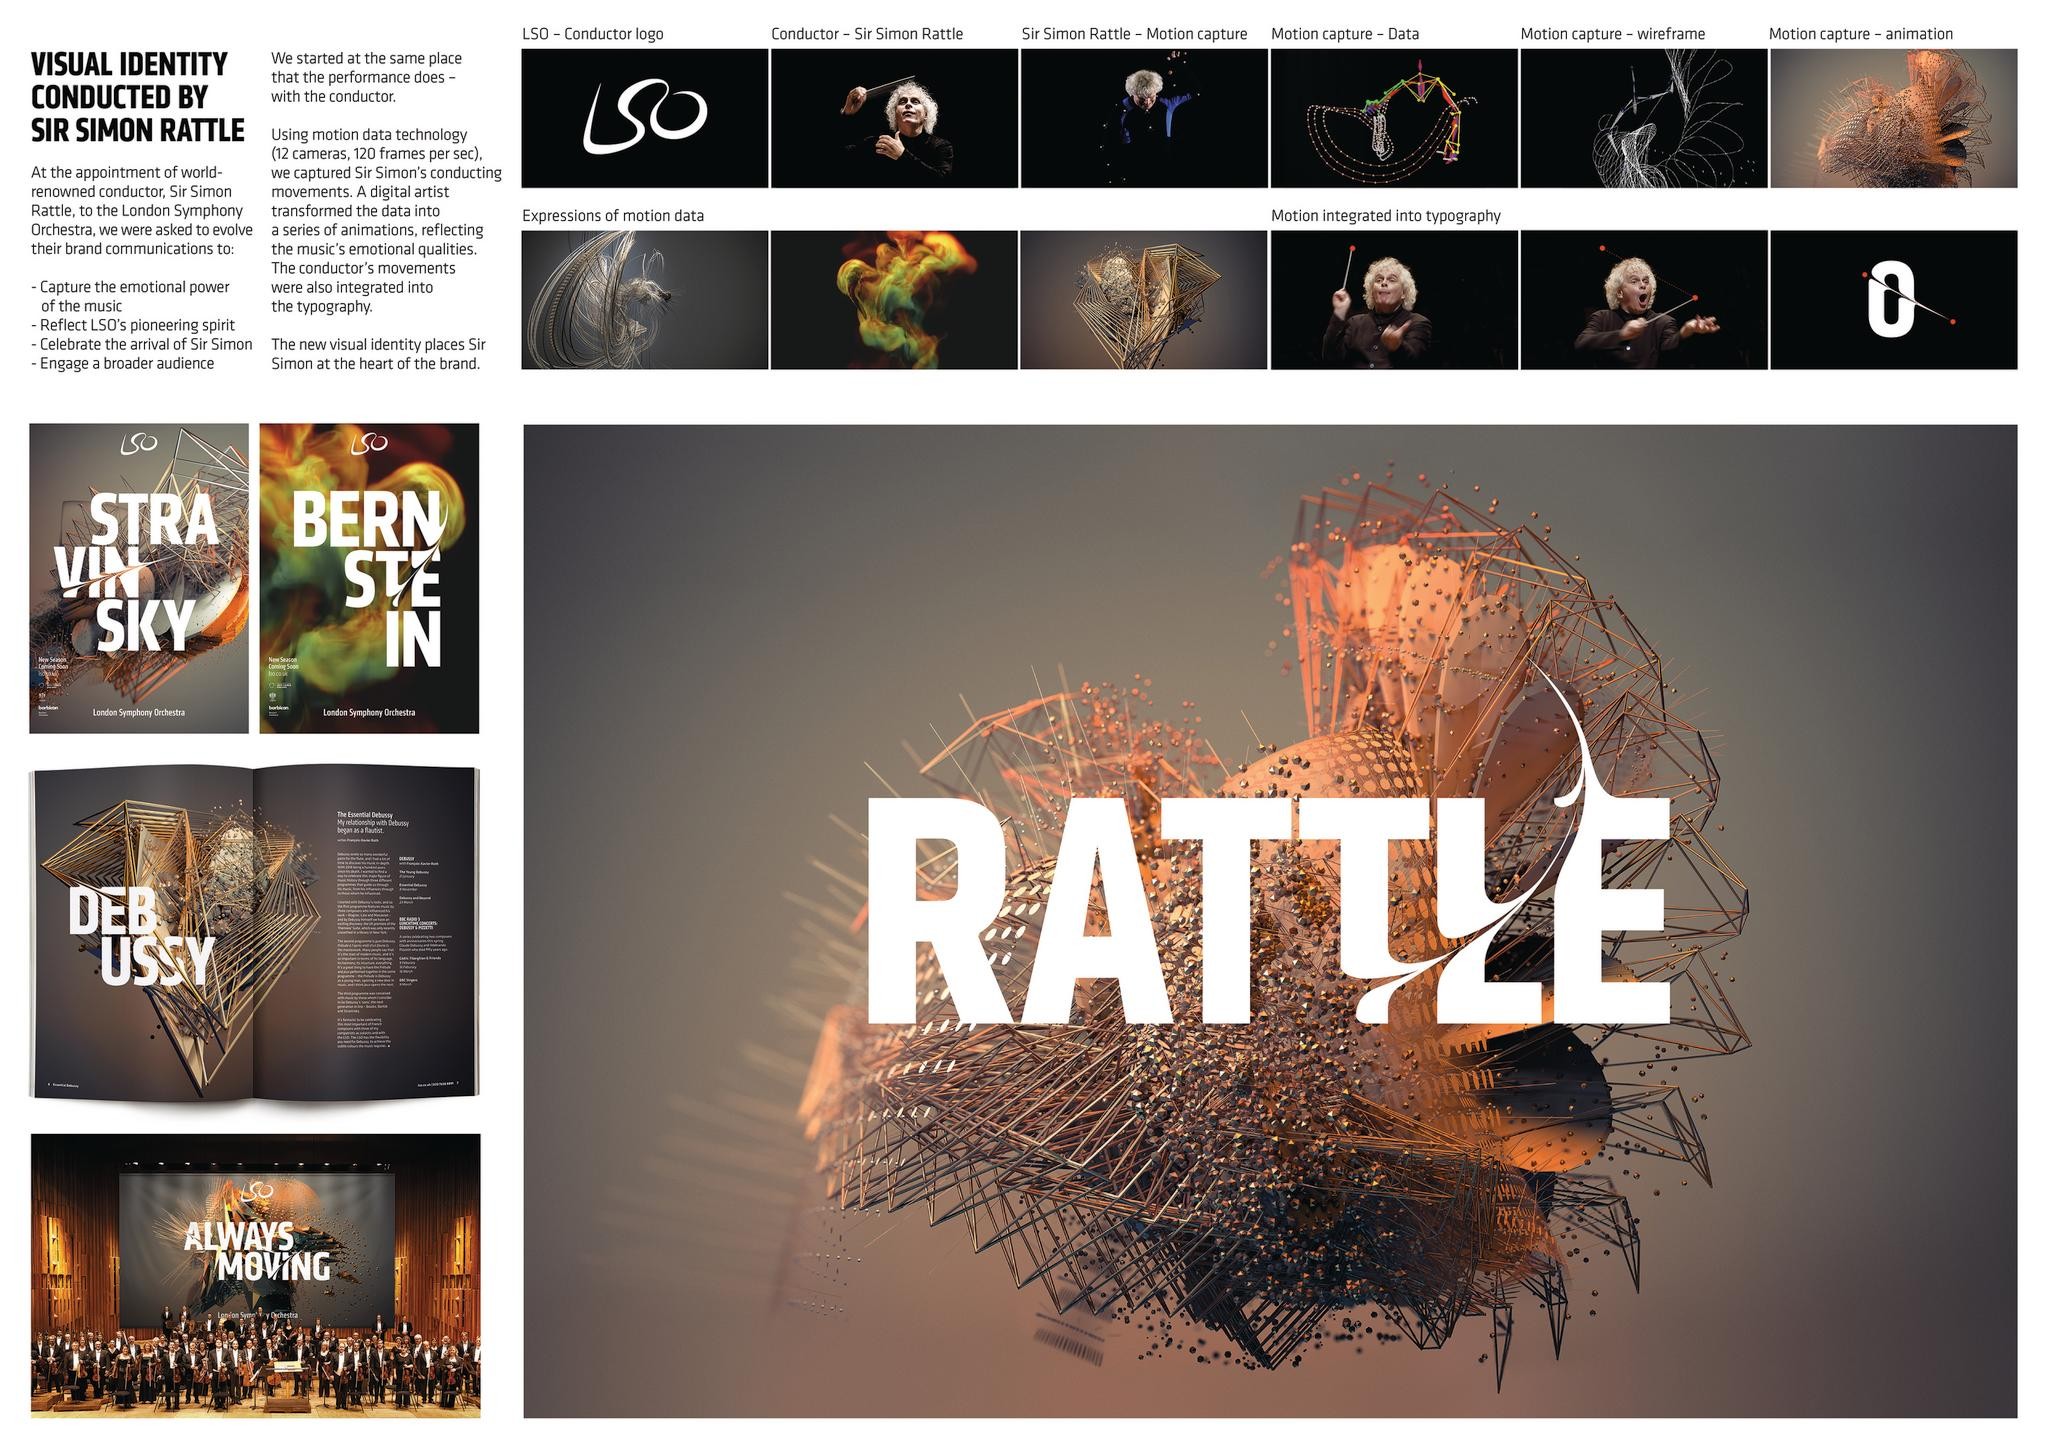 VISUAL IDENTITY CONDUCTED BY SIR SIMON RATTLE